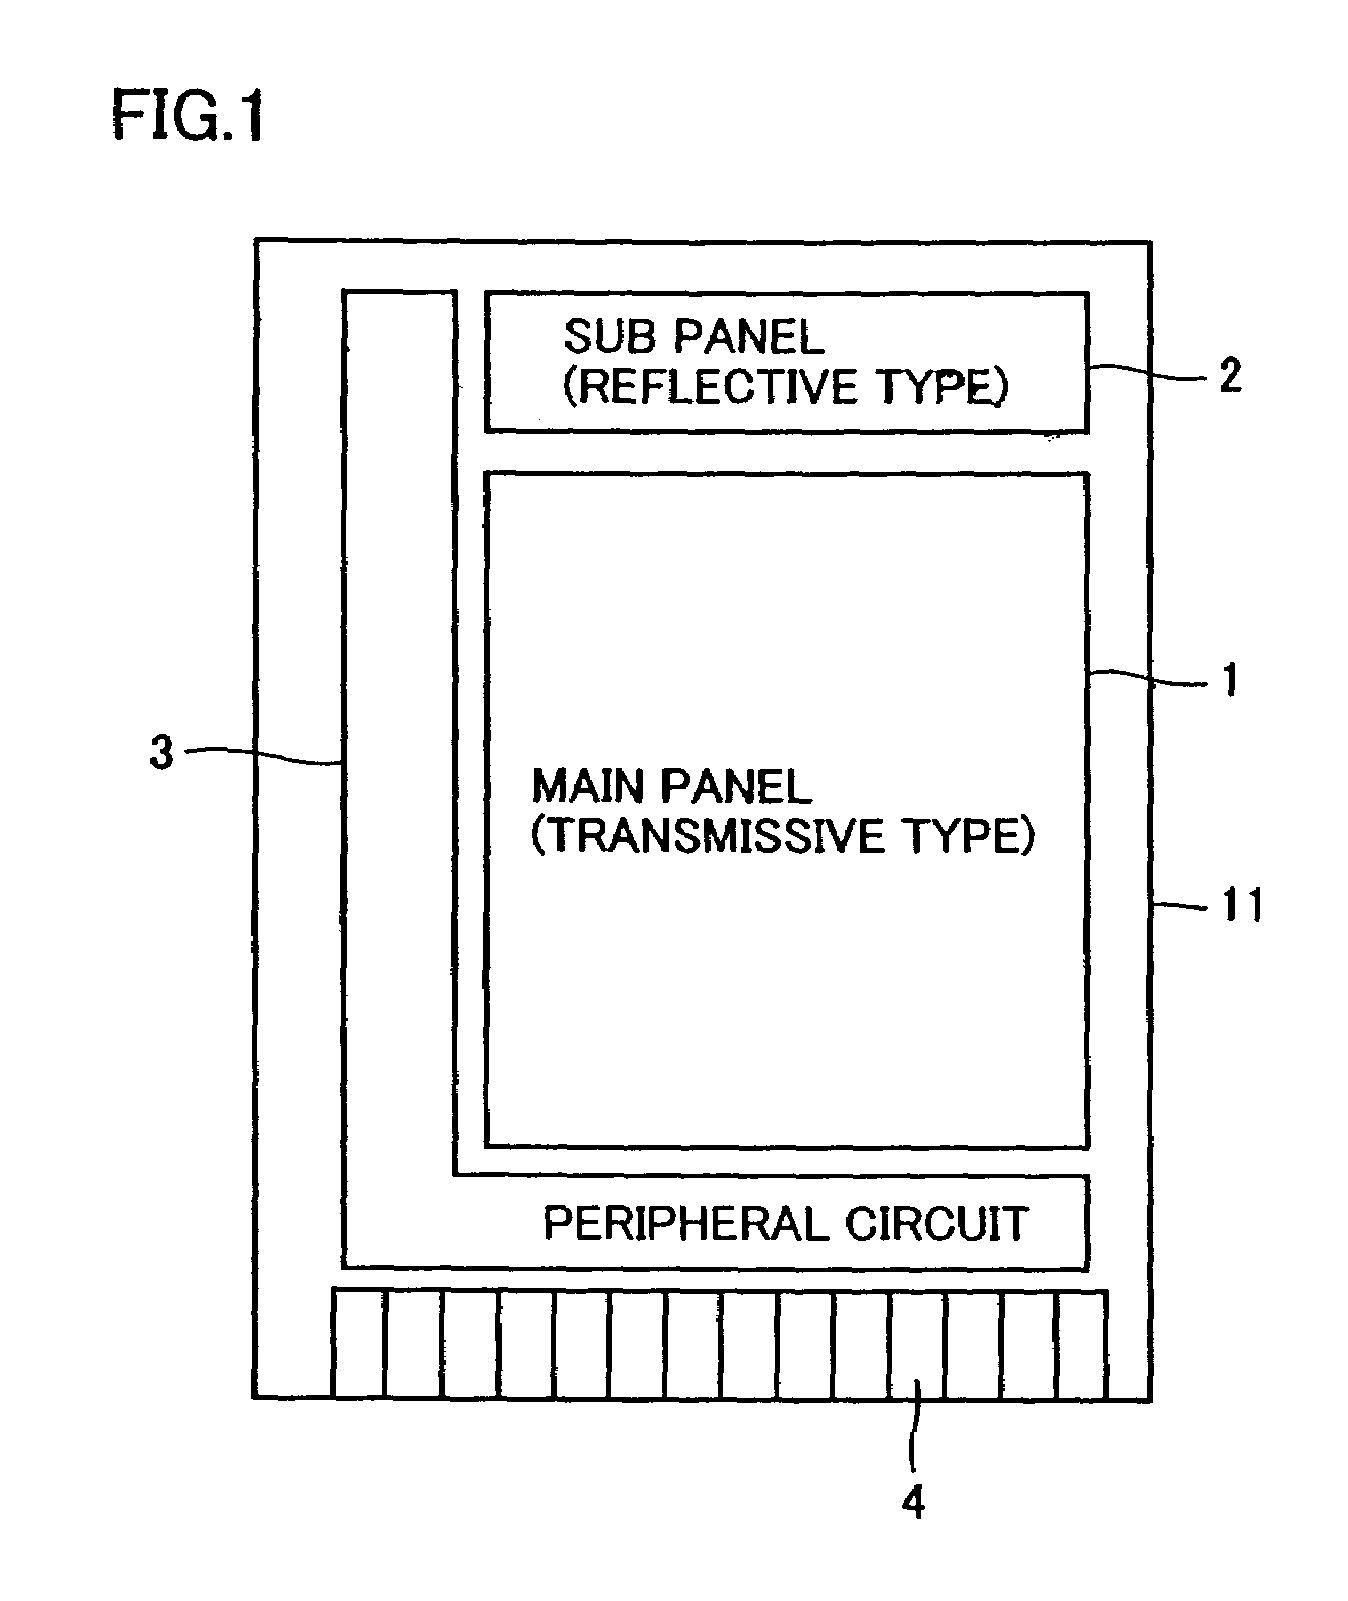 Display including a plurality of display panels